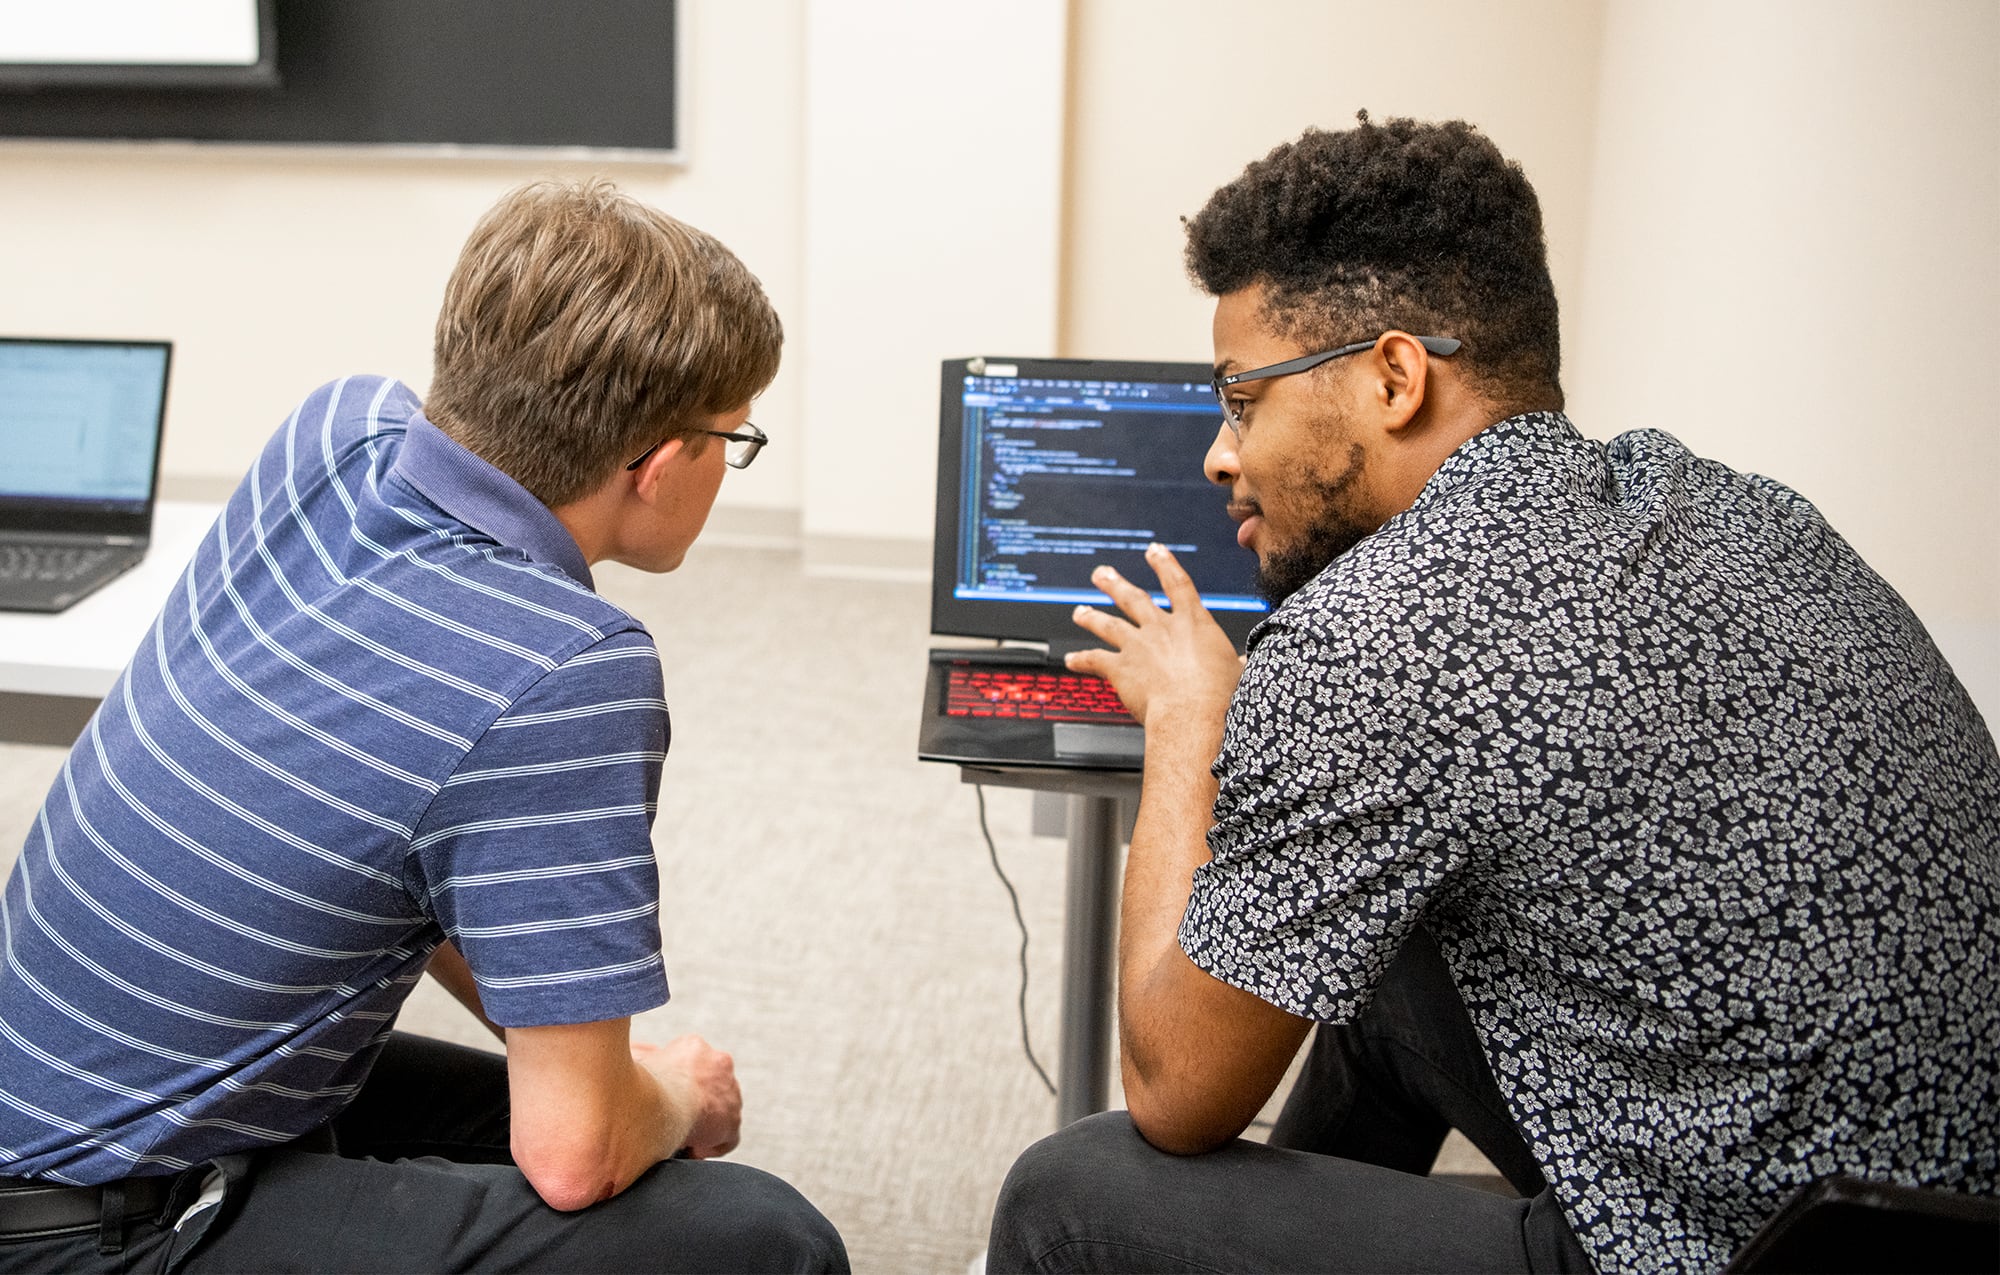 A male student explaining software to another male student at a laptop.